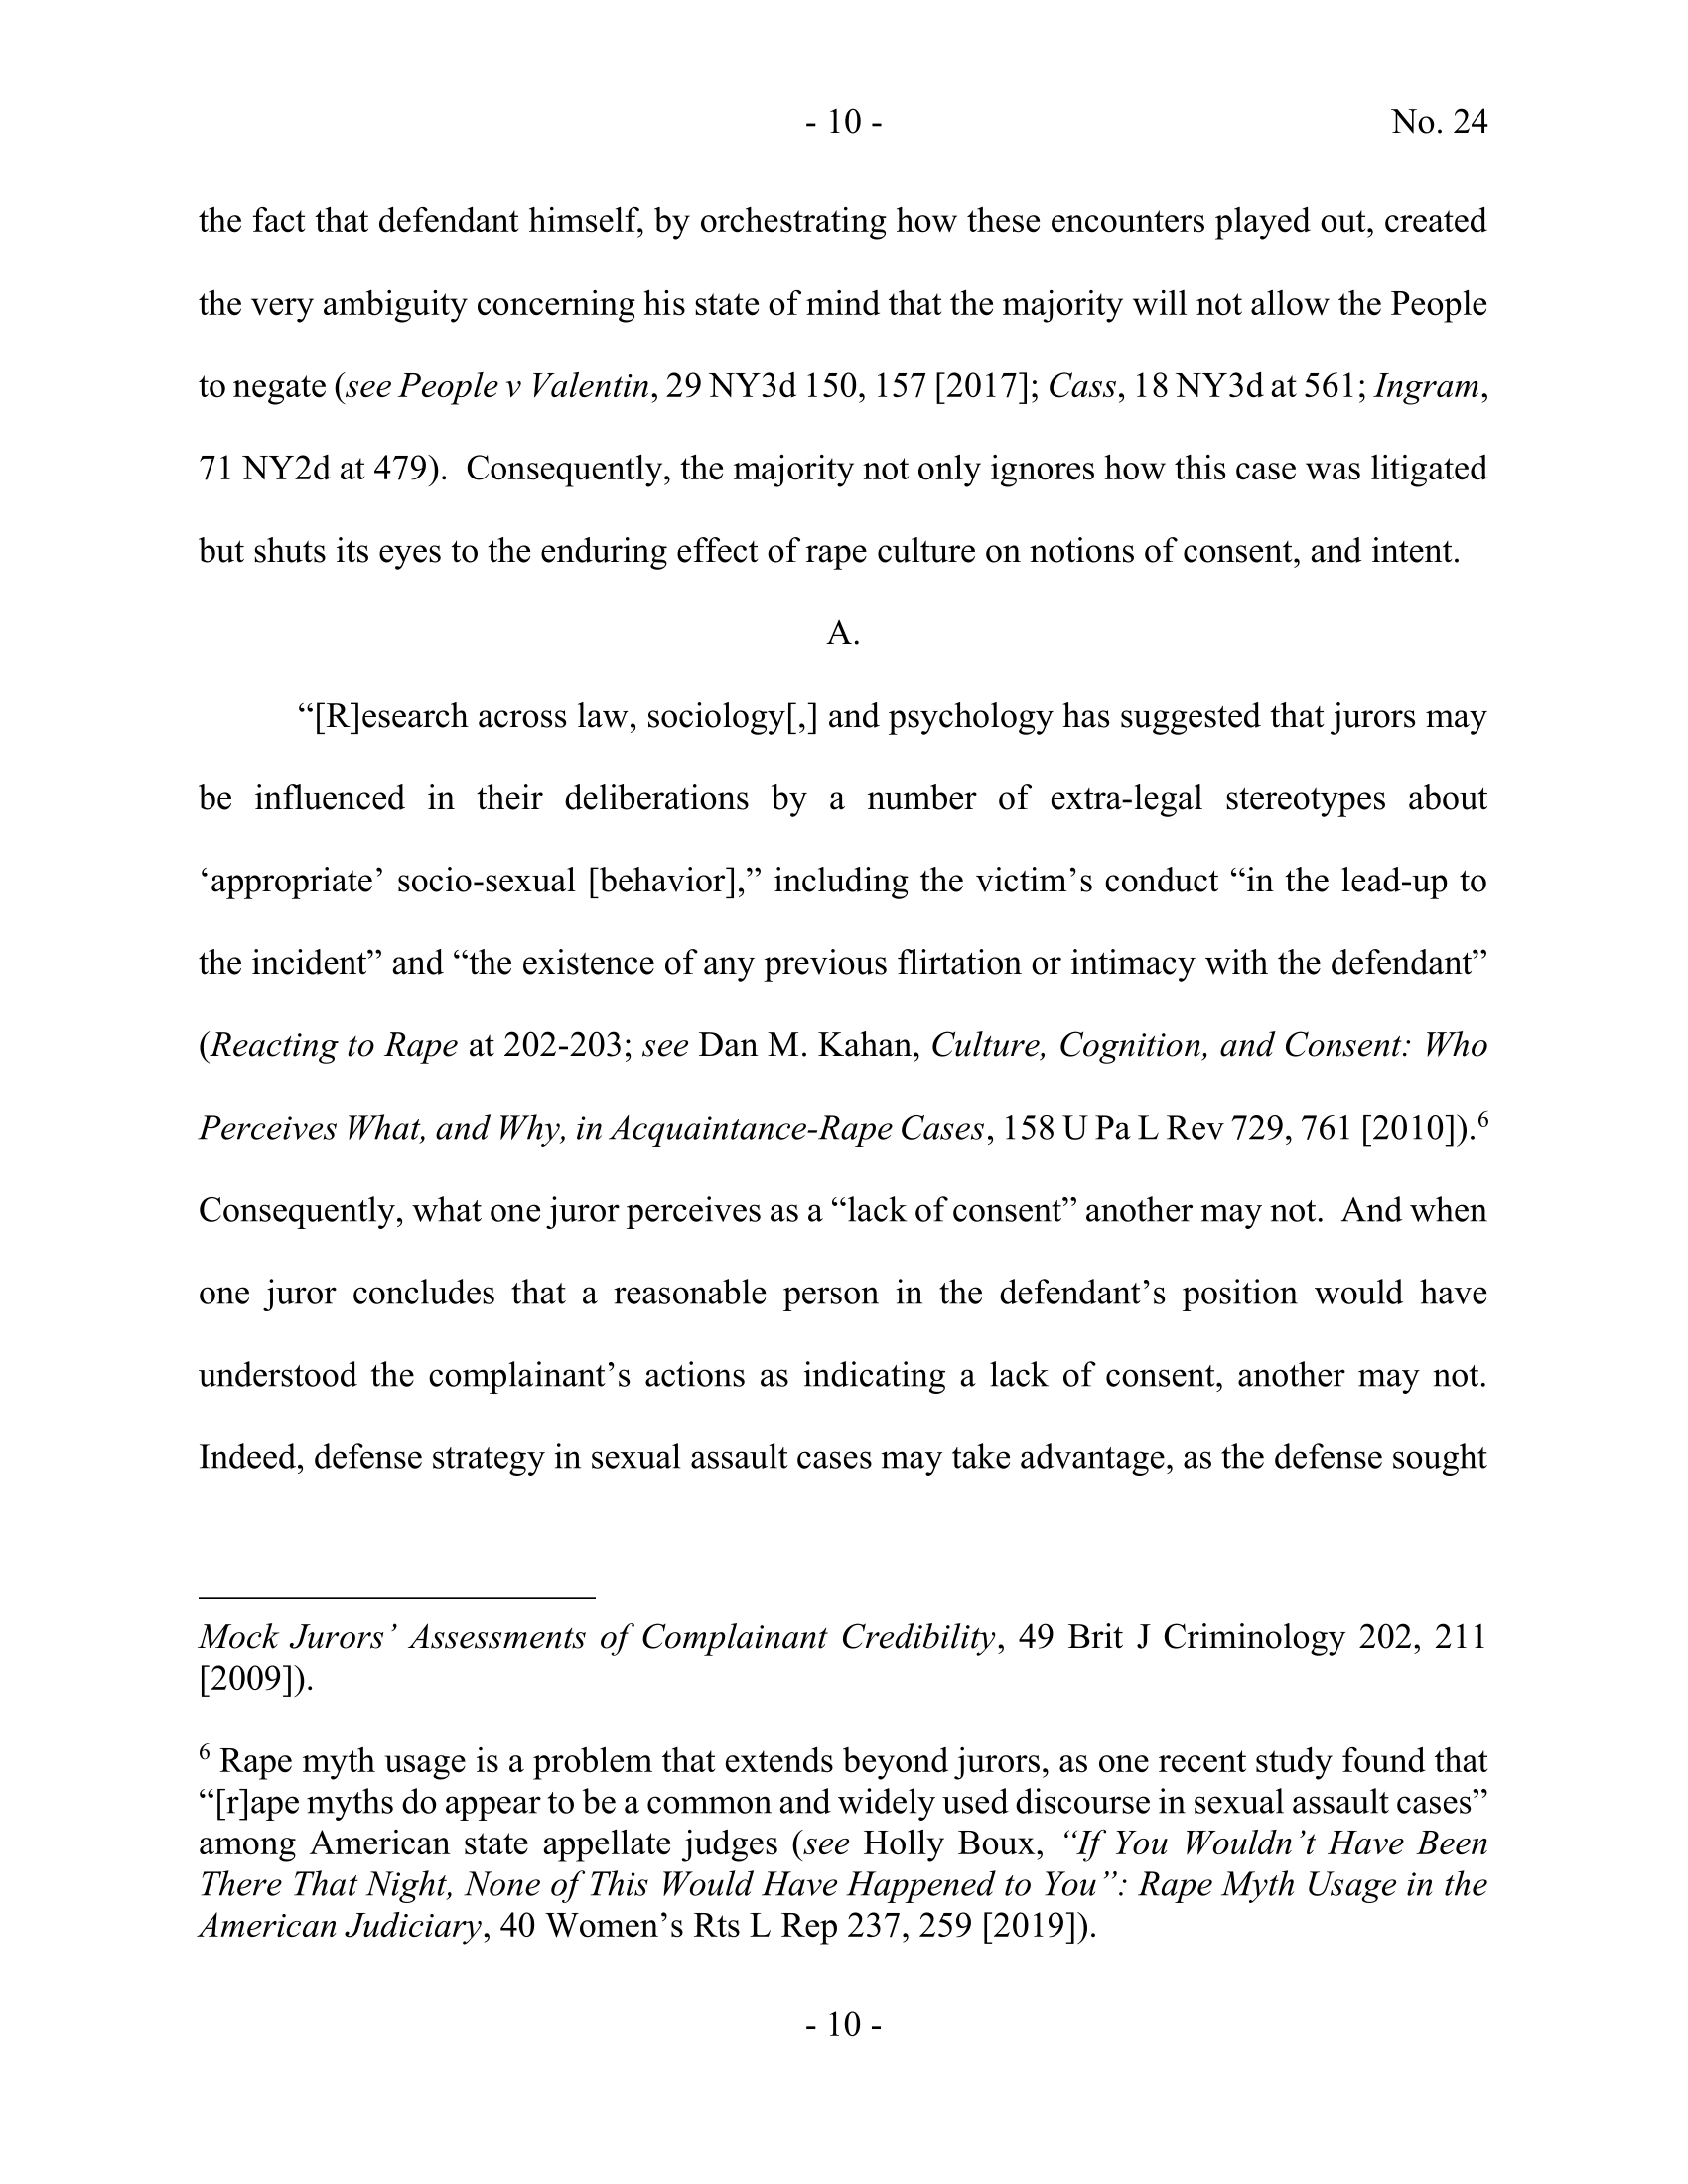 Page 50 of undefined PDF document.